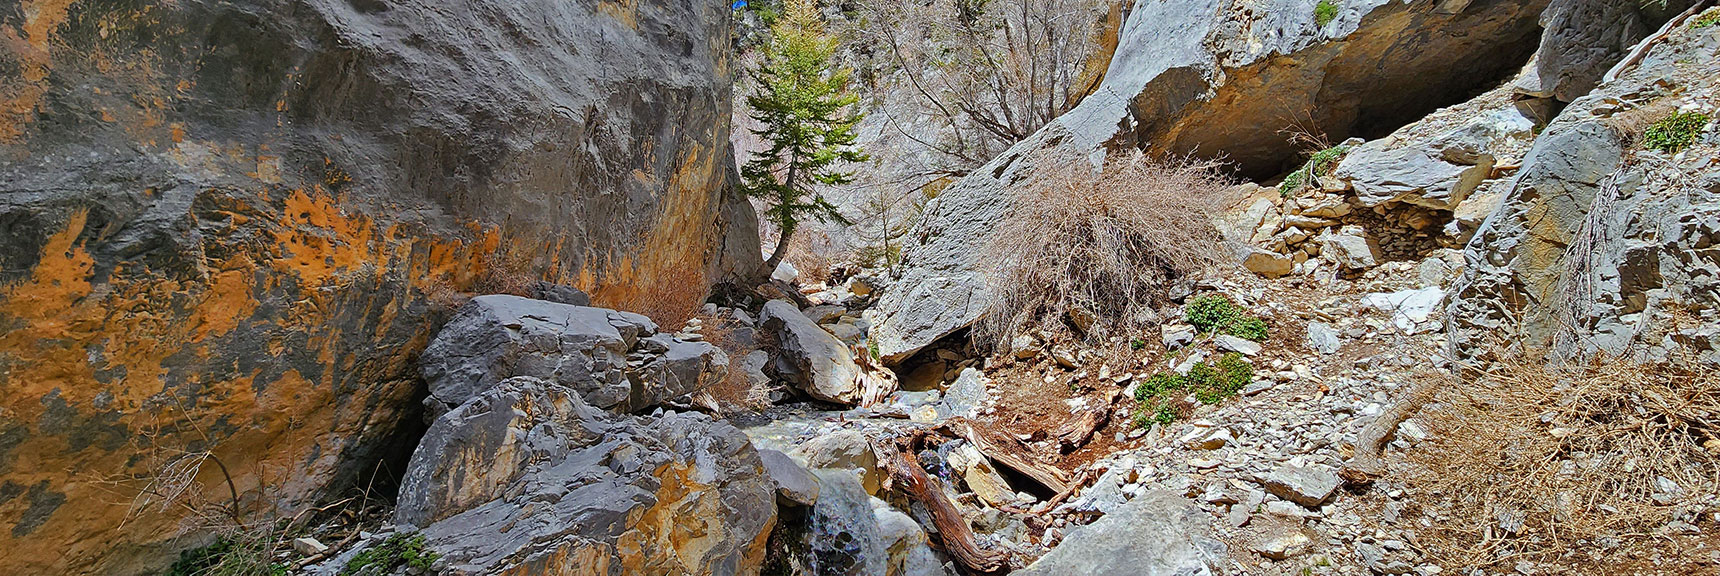 Boulders and Other Obstacles Getting Larger. Cairns Begin to Mark the Way. | Fletcher Canyon Trail | Mt Charleston Wilderness | Spring Mountains, Nevada